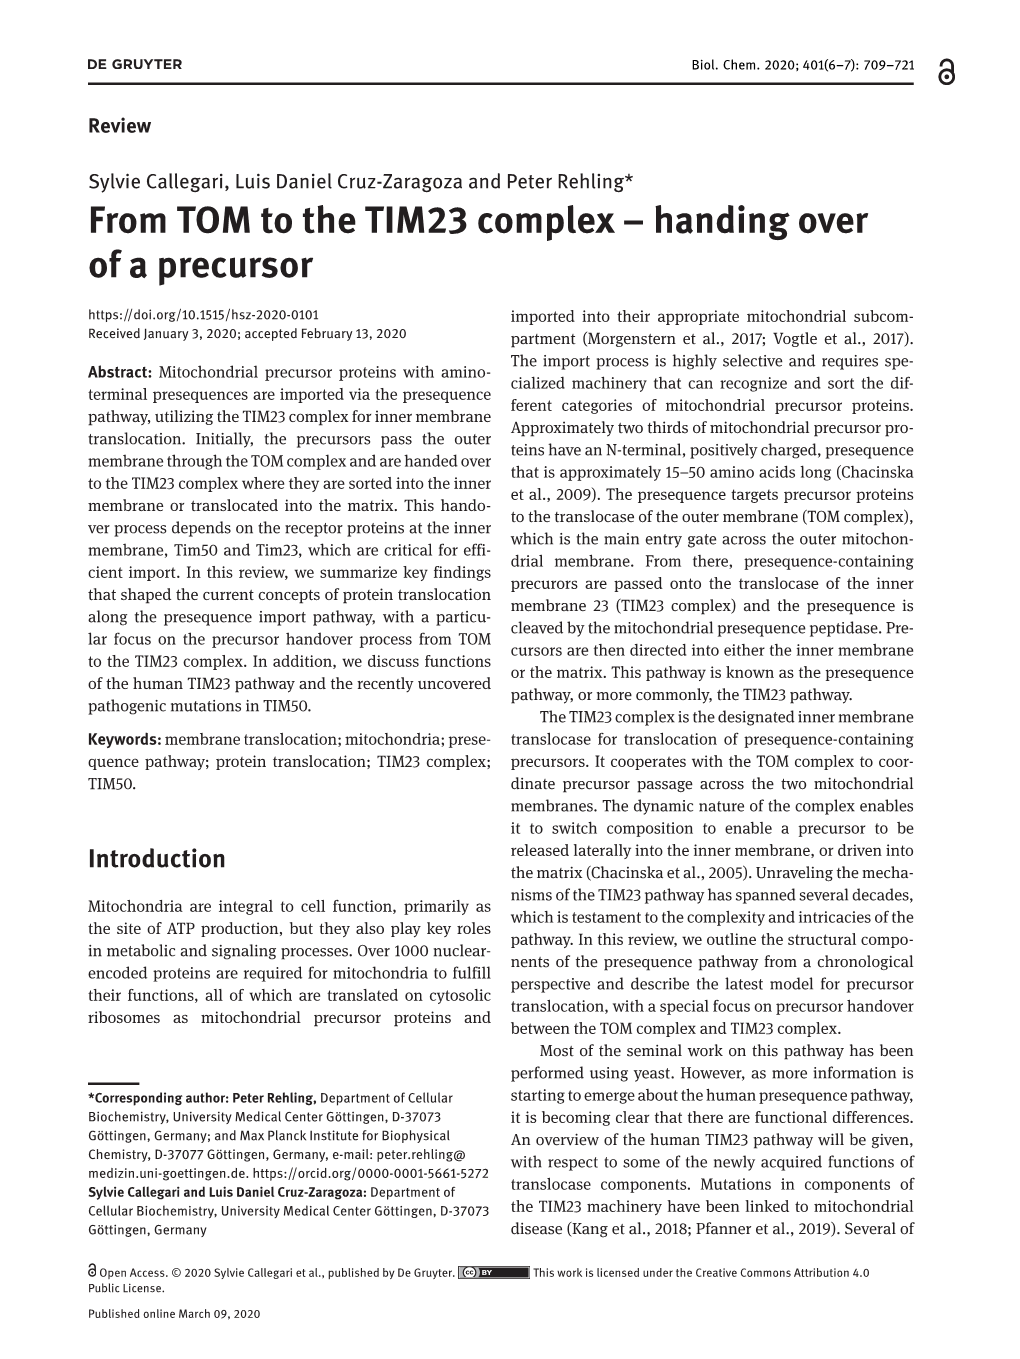 From TOM to the TIM23 Complex – Handing Over of a Precursor